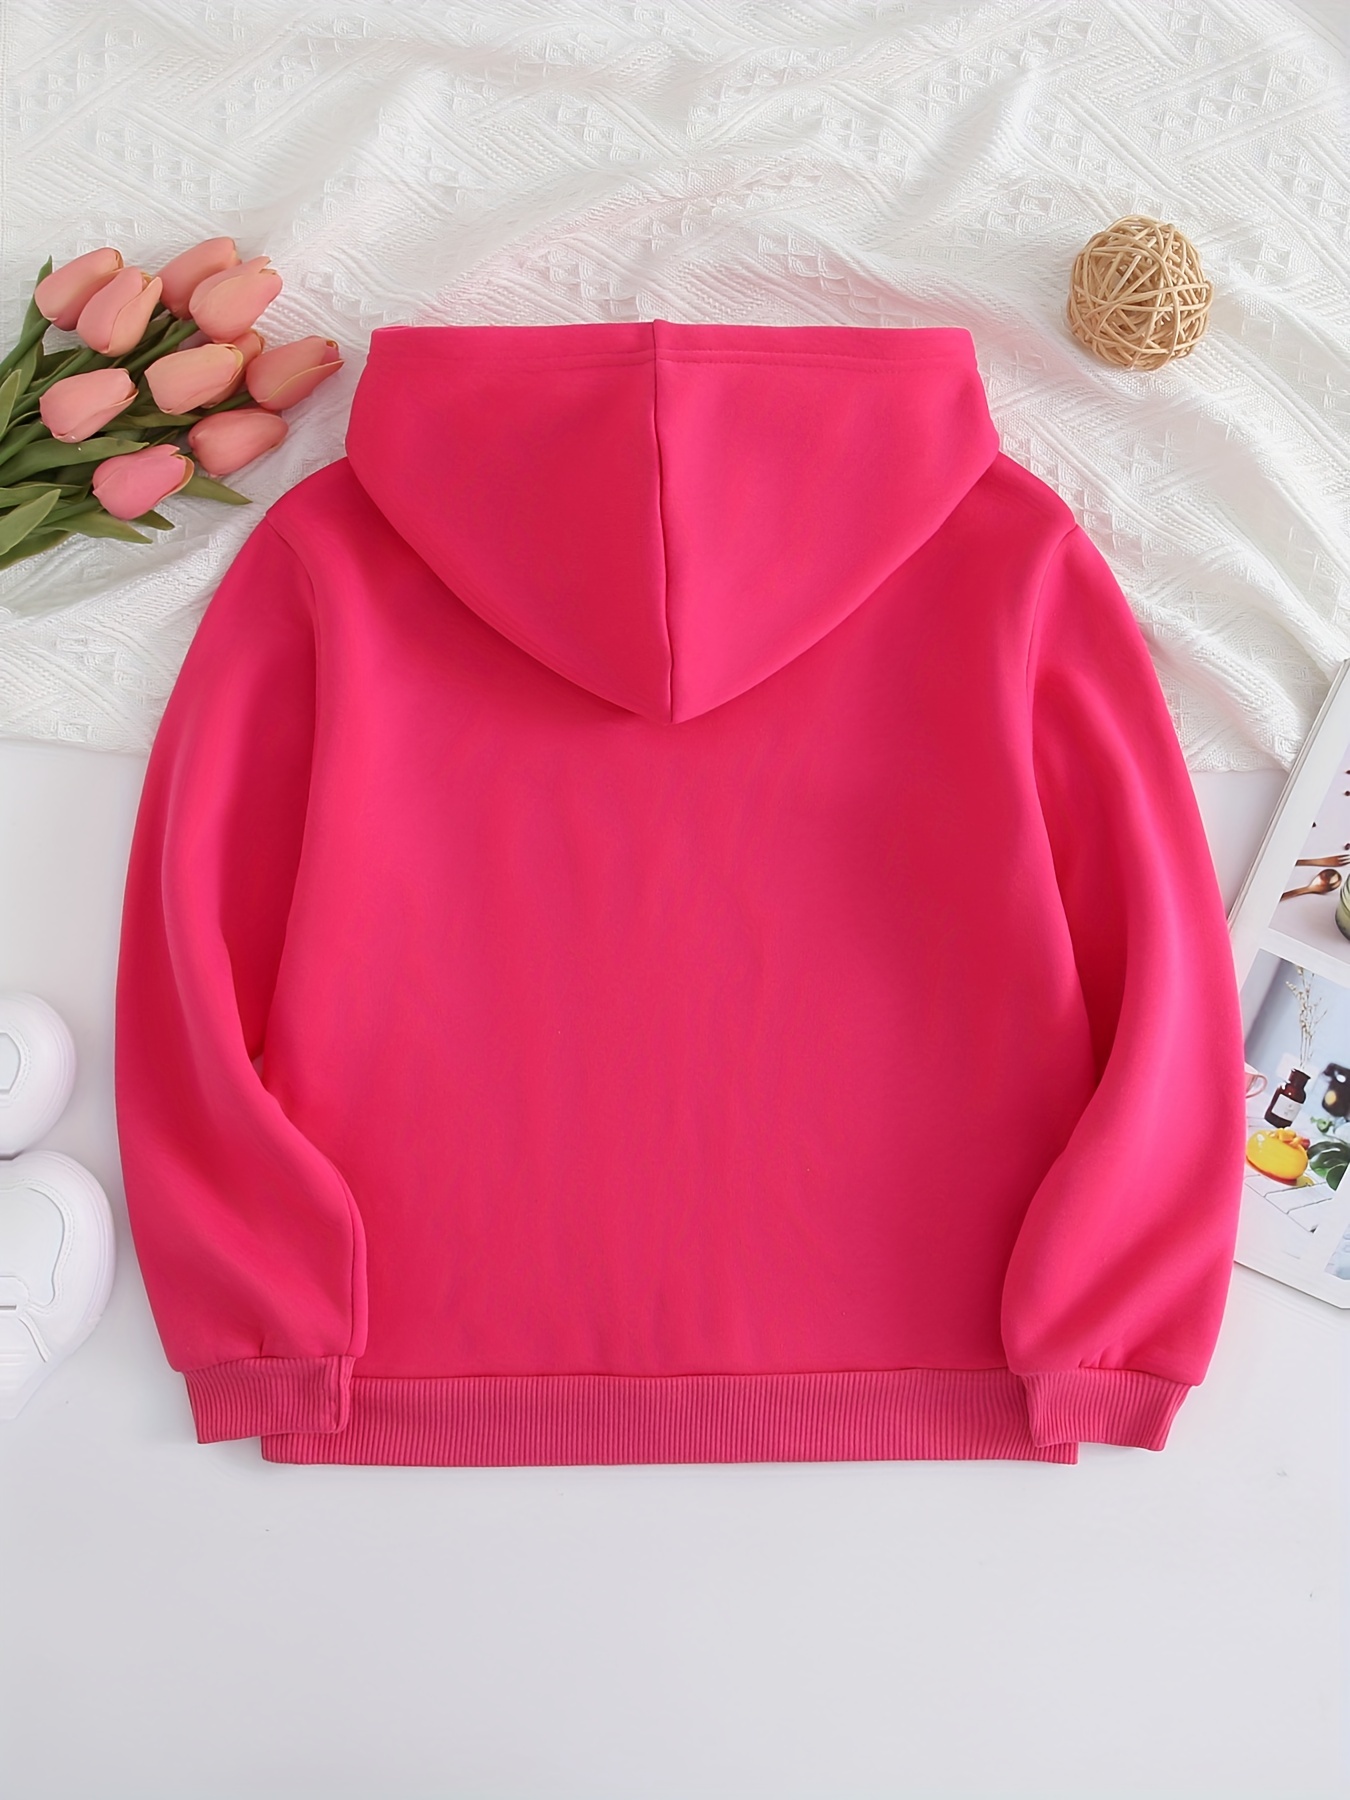  YSTARDREAM Axolotl Hoodie Pink Kids Kawaii Hoodies for Girls  6-7 Long Sleeve Shirts for Teens Cute Clothes Aesthetic Sweatshirts  Crewneck Pullover Tops Fall Outfits Sweater Jumper Yoga Clothing: Clothing,  Shoes 